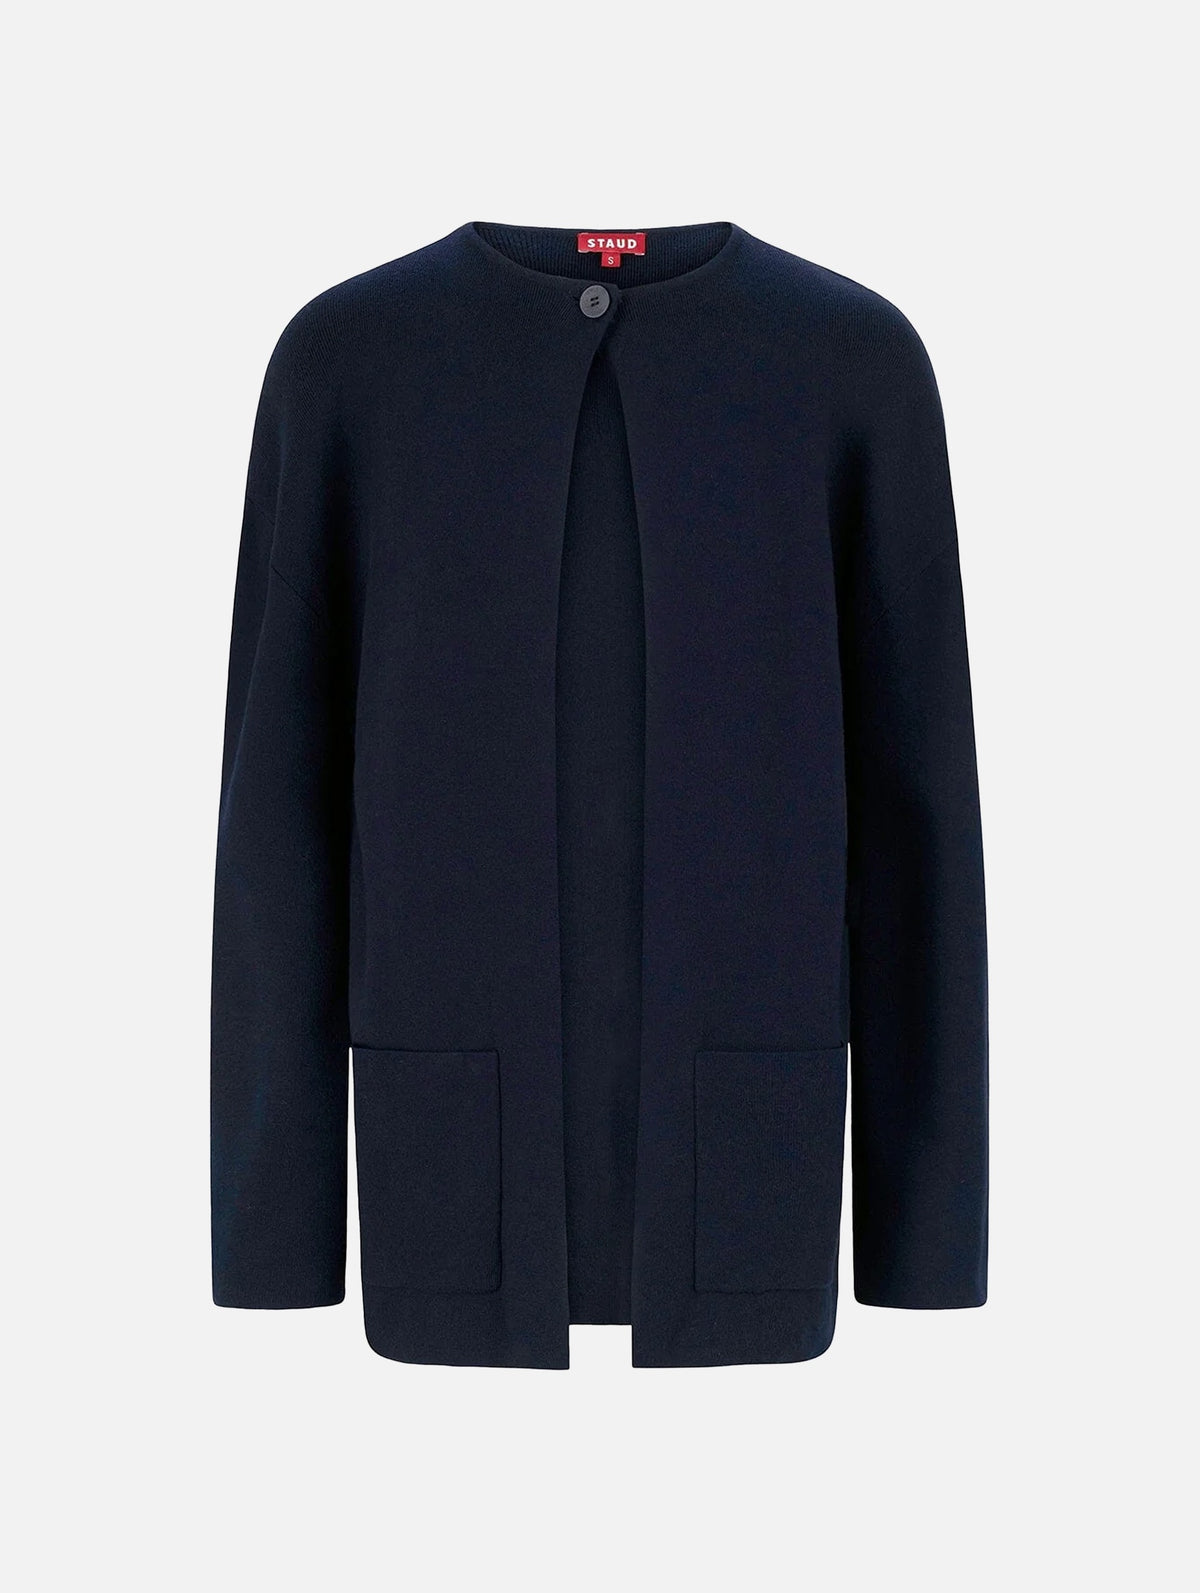 Carry On Cardigan in Navy